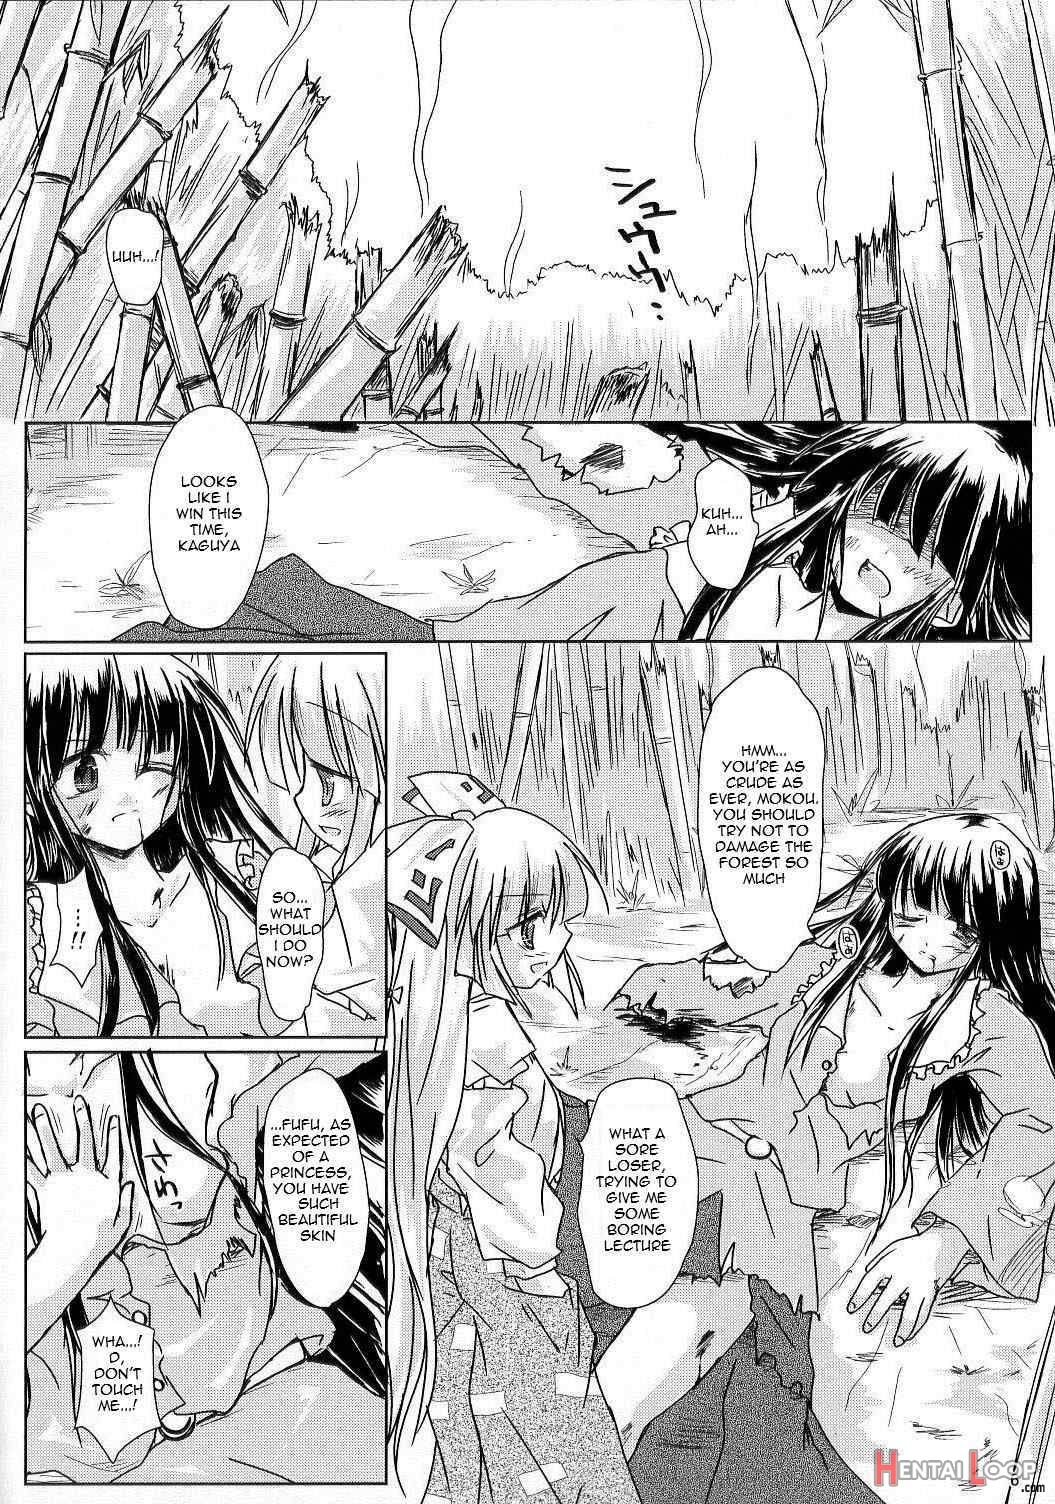 Hourai Geppei page 3